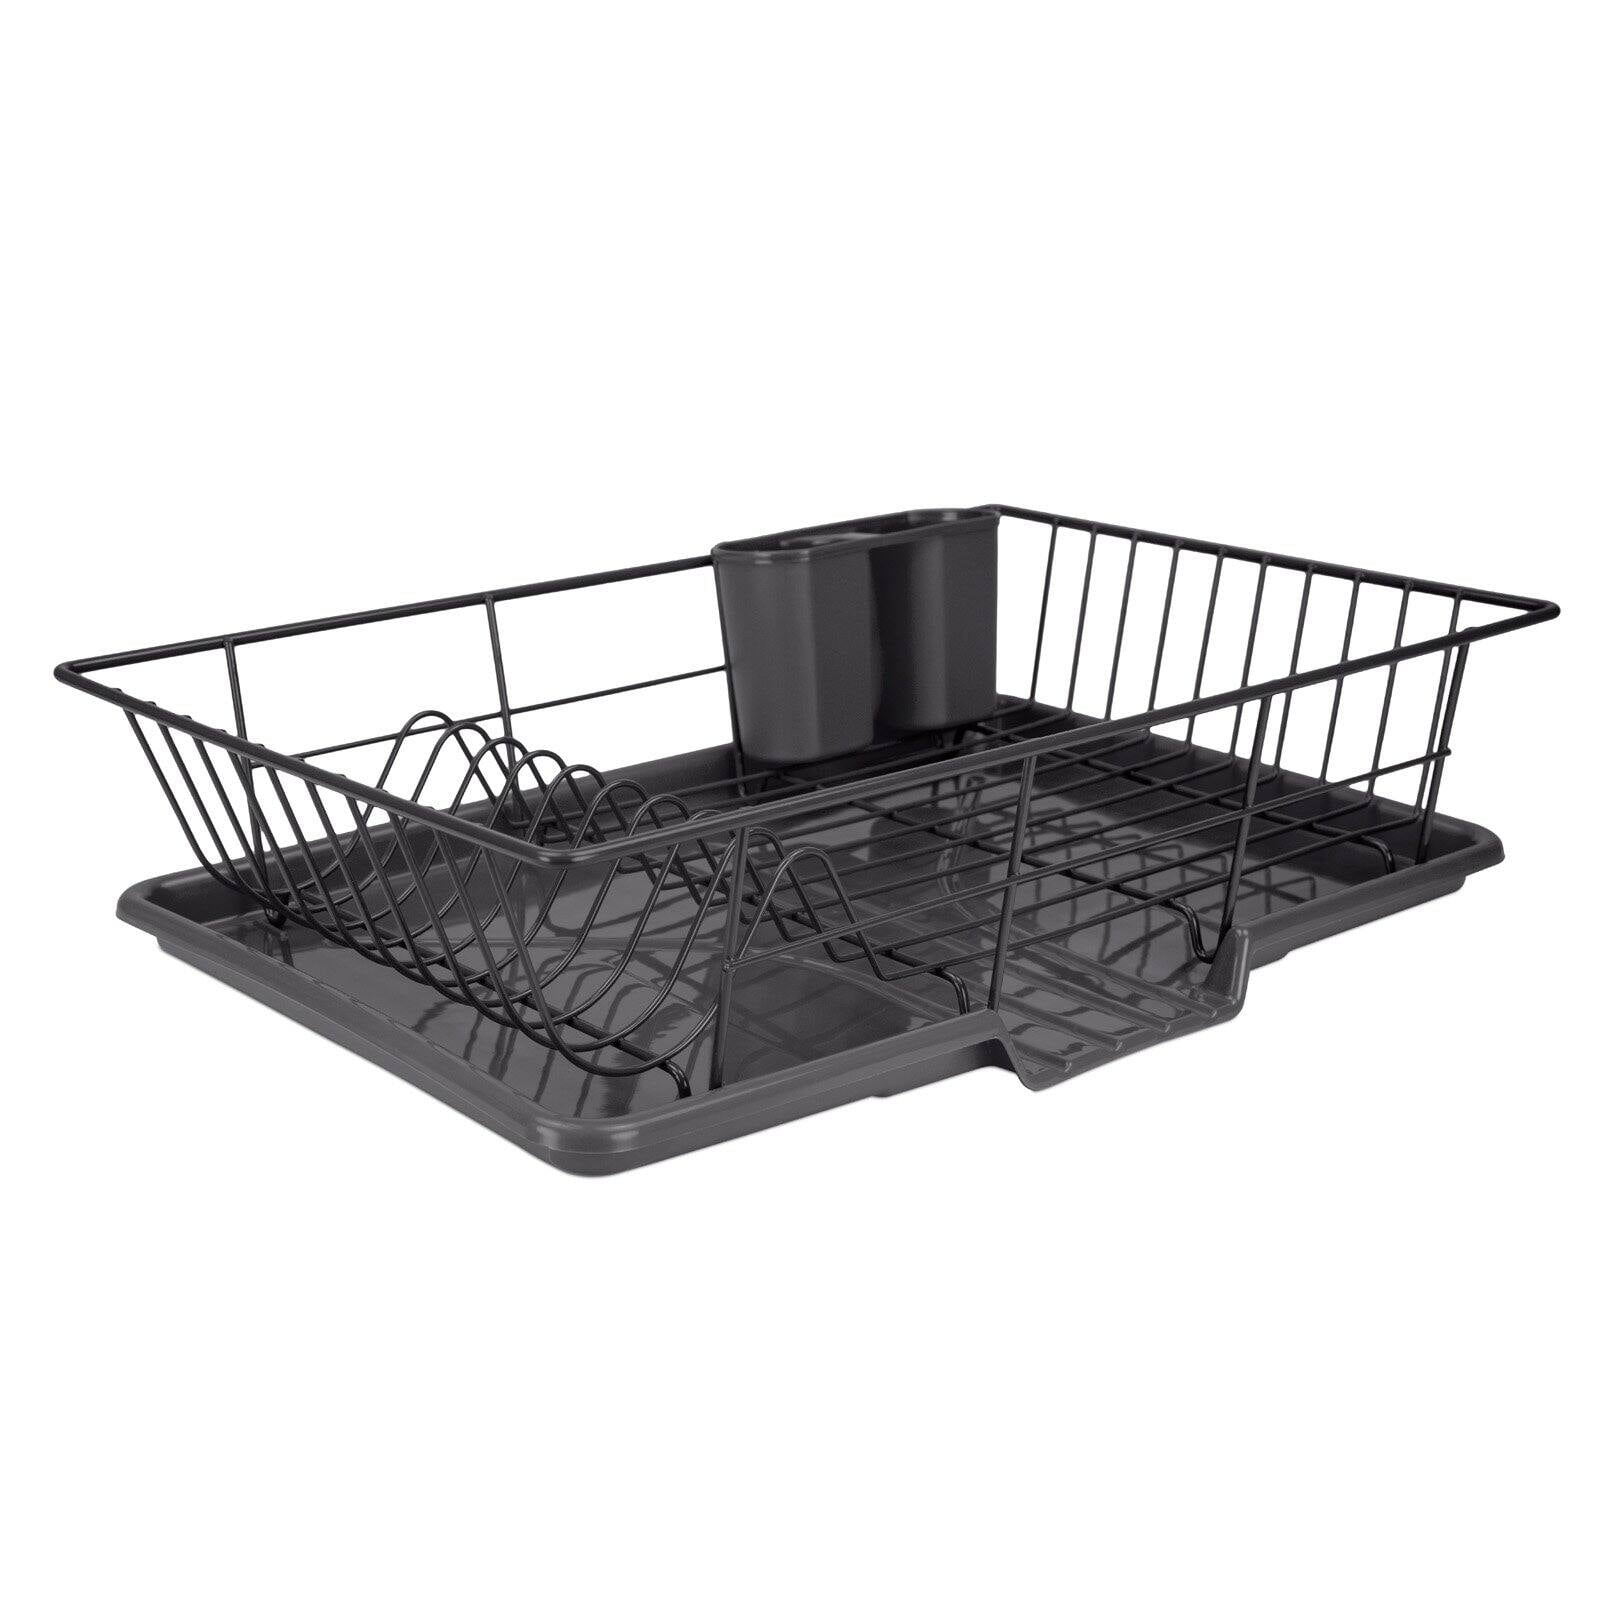 Aoibox All-in-one Design Extendable (13.4' to 19.3') Black Dish Drainers  Dish Rack for Kitchen Counter with Drying Board HDDB1460 - The Home Depot